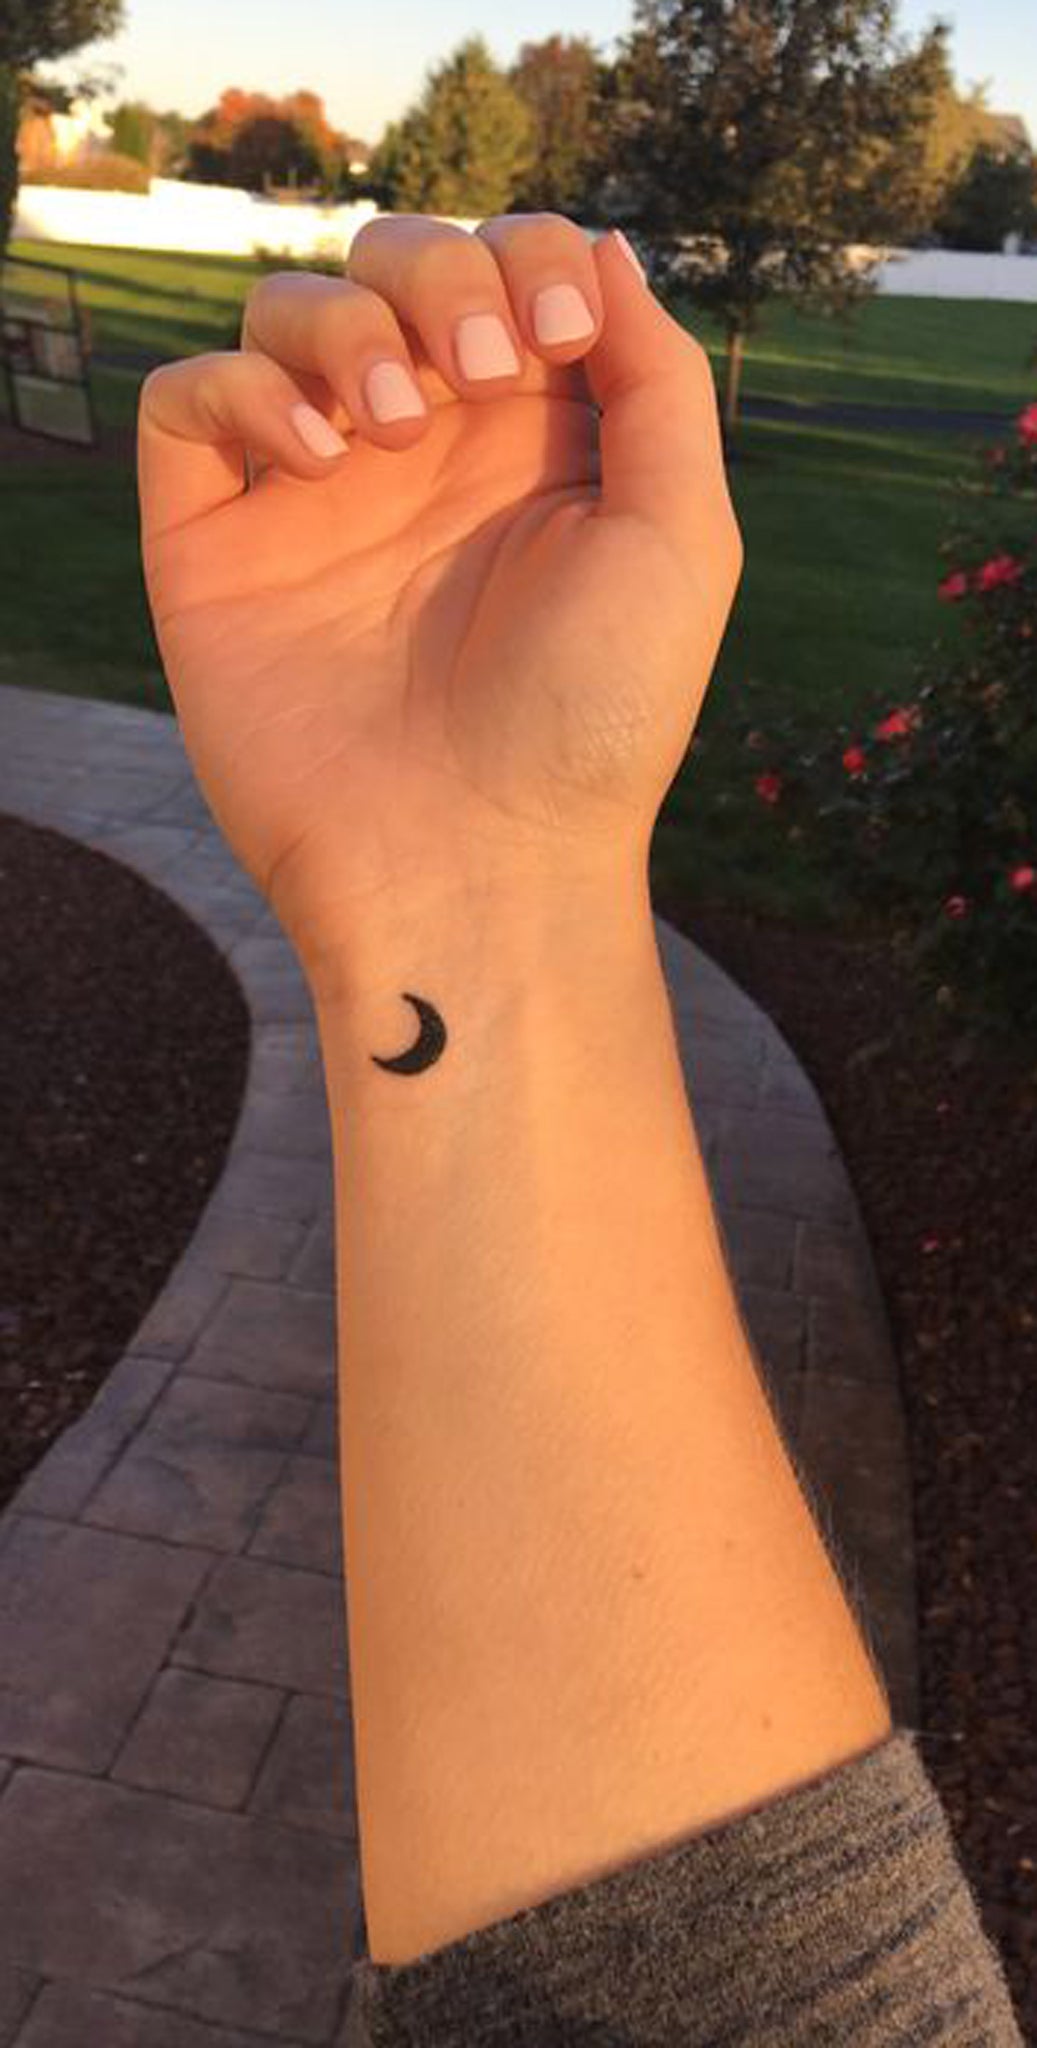 Hand with a Crescent Moon Tattoo  Free Stock Photo